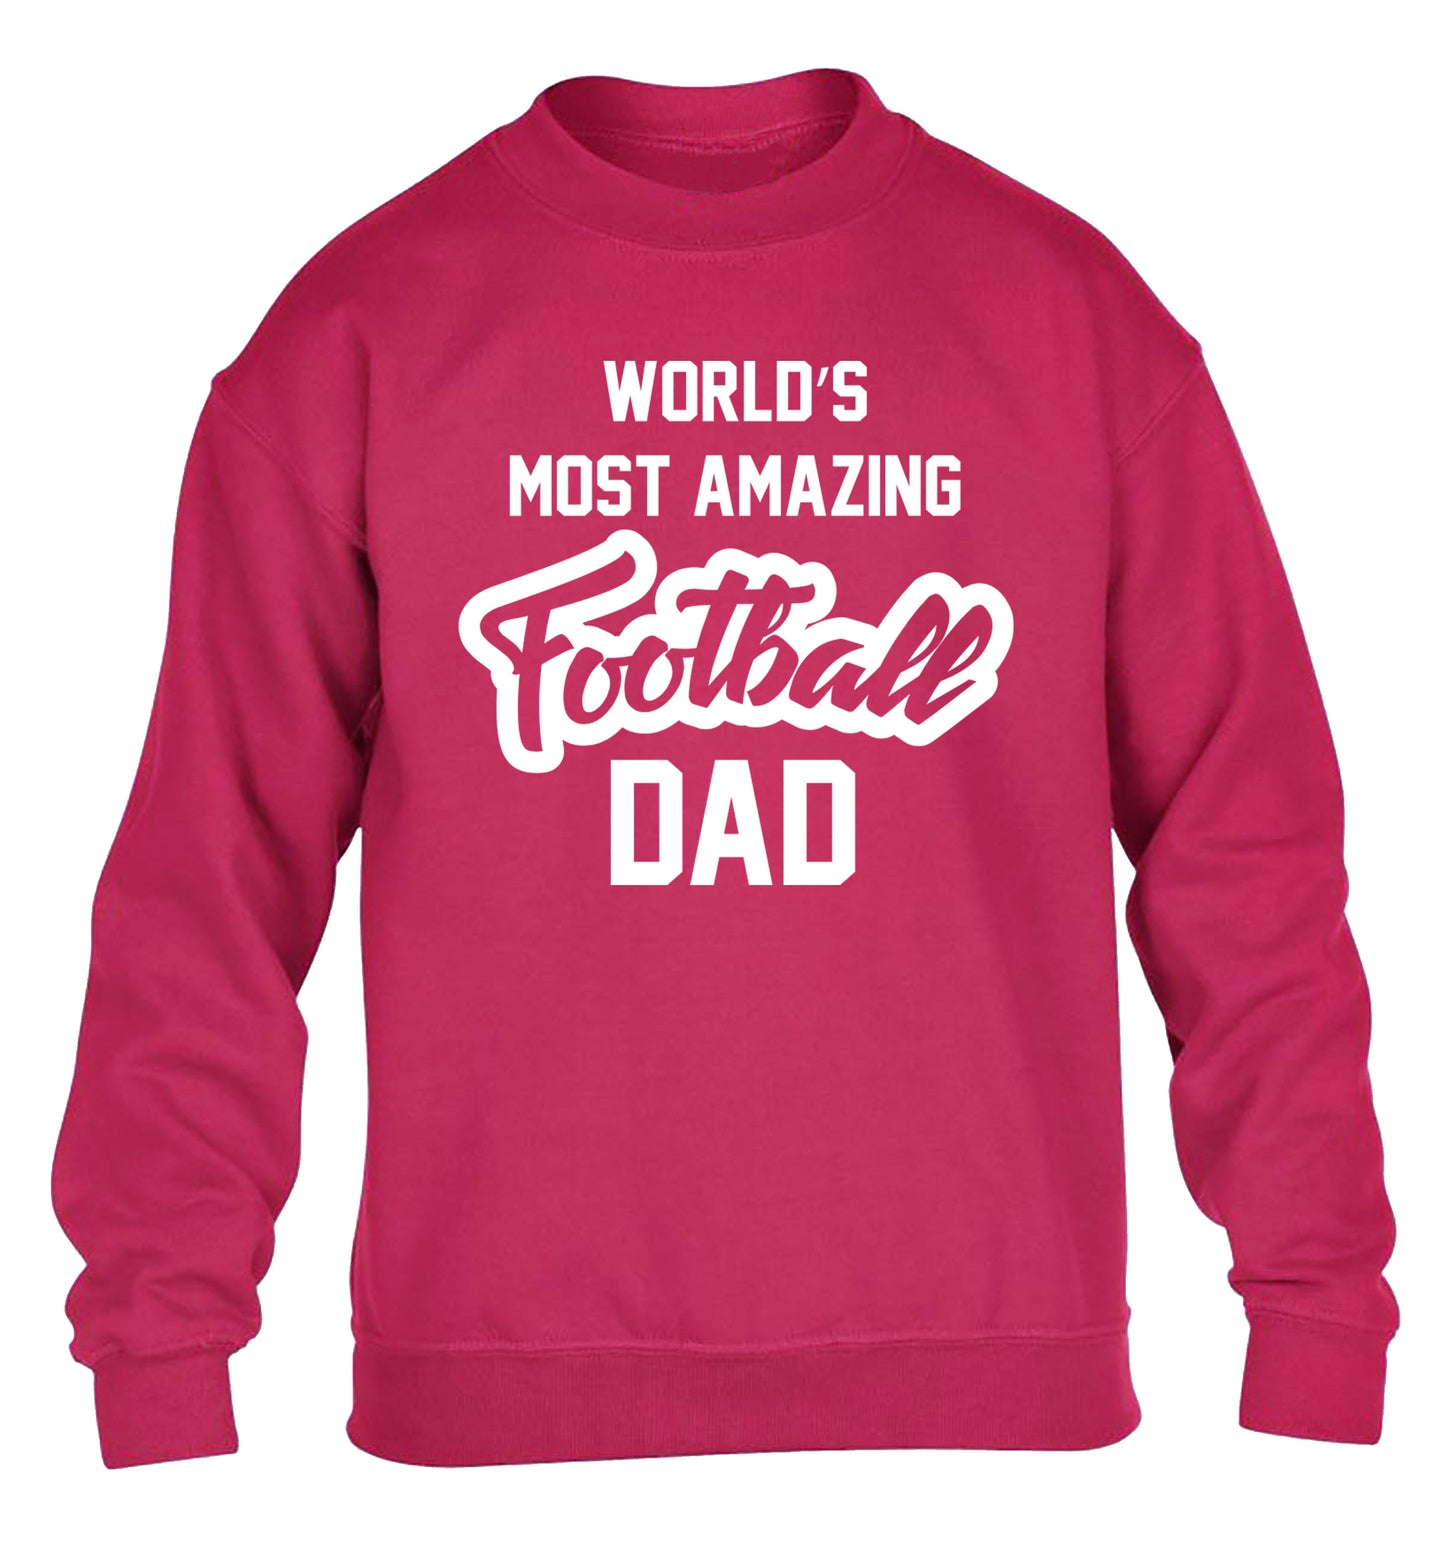 Worlds most amazing football dad children's pink sweater 12-14 Years